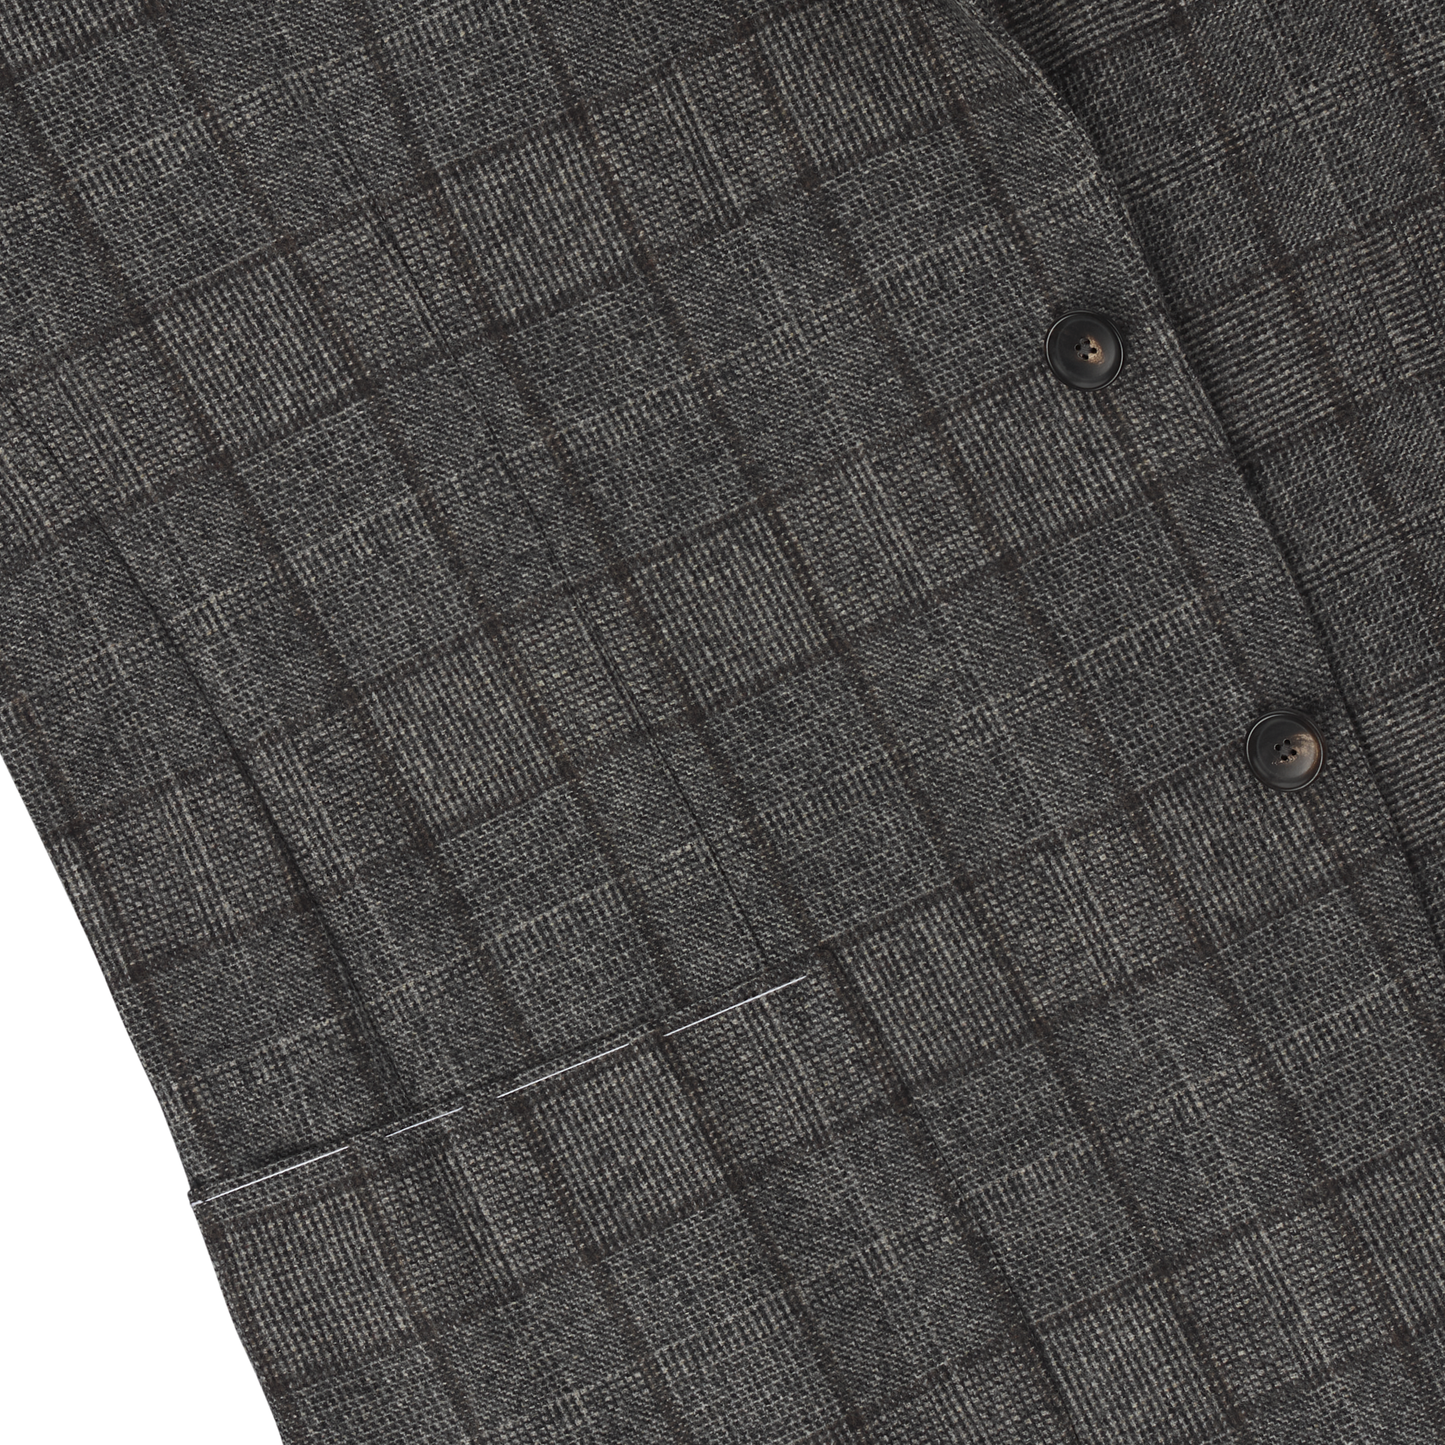 De Petrillo Single-Breasted Checked Wool Jacket in Grey. Exclusively Made for Sartale - SARTALE